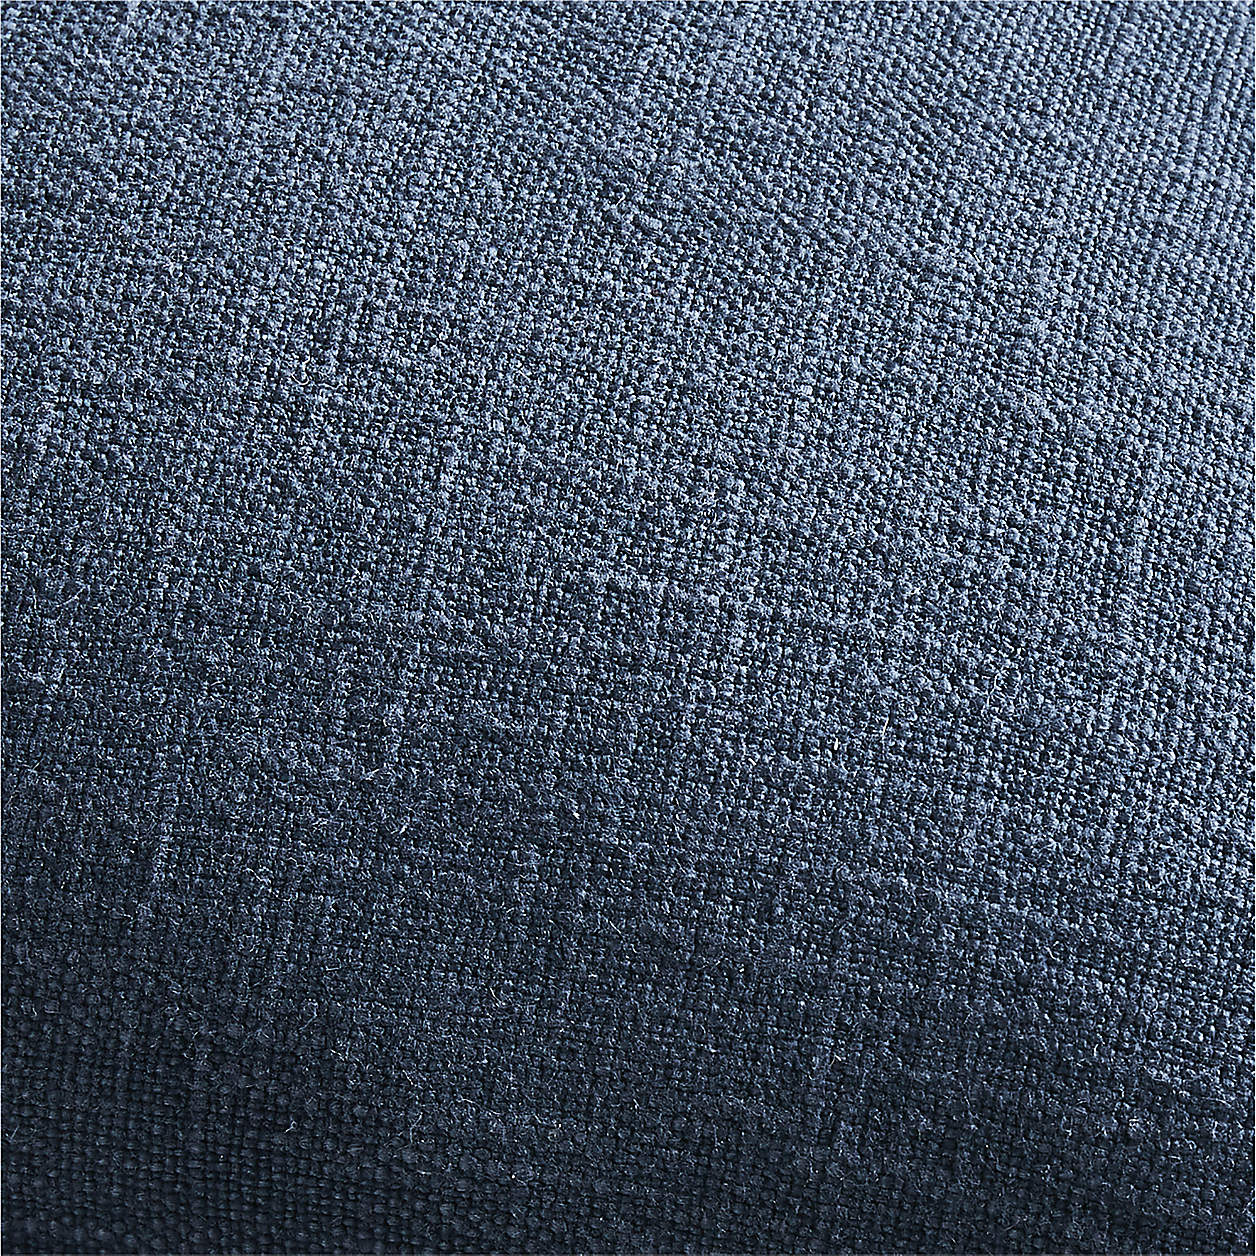 Blue 20"x20" Organic Laundered Linen Throw Pillow Cover